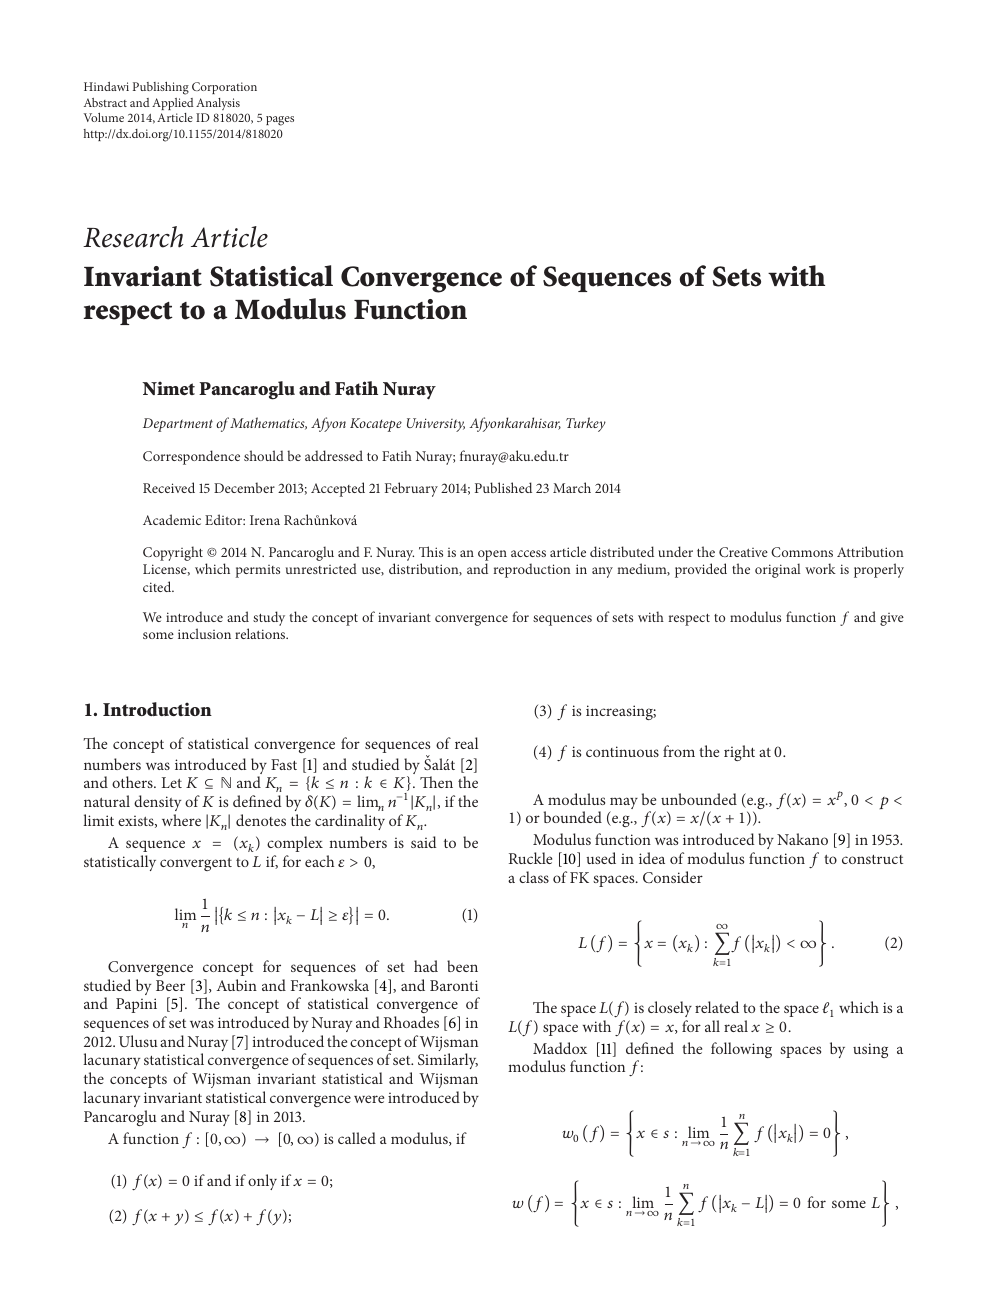 Invariant Statistical Convergence Of Sequences Of Sets With Respect To A Modulus Function Topic Of Research Paper In Mathematics Download Scholarly Article Pdf And Read For Free On Cyberleninka Open Science